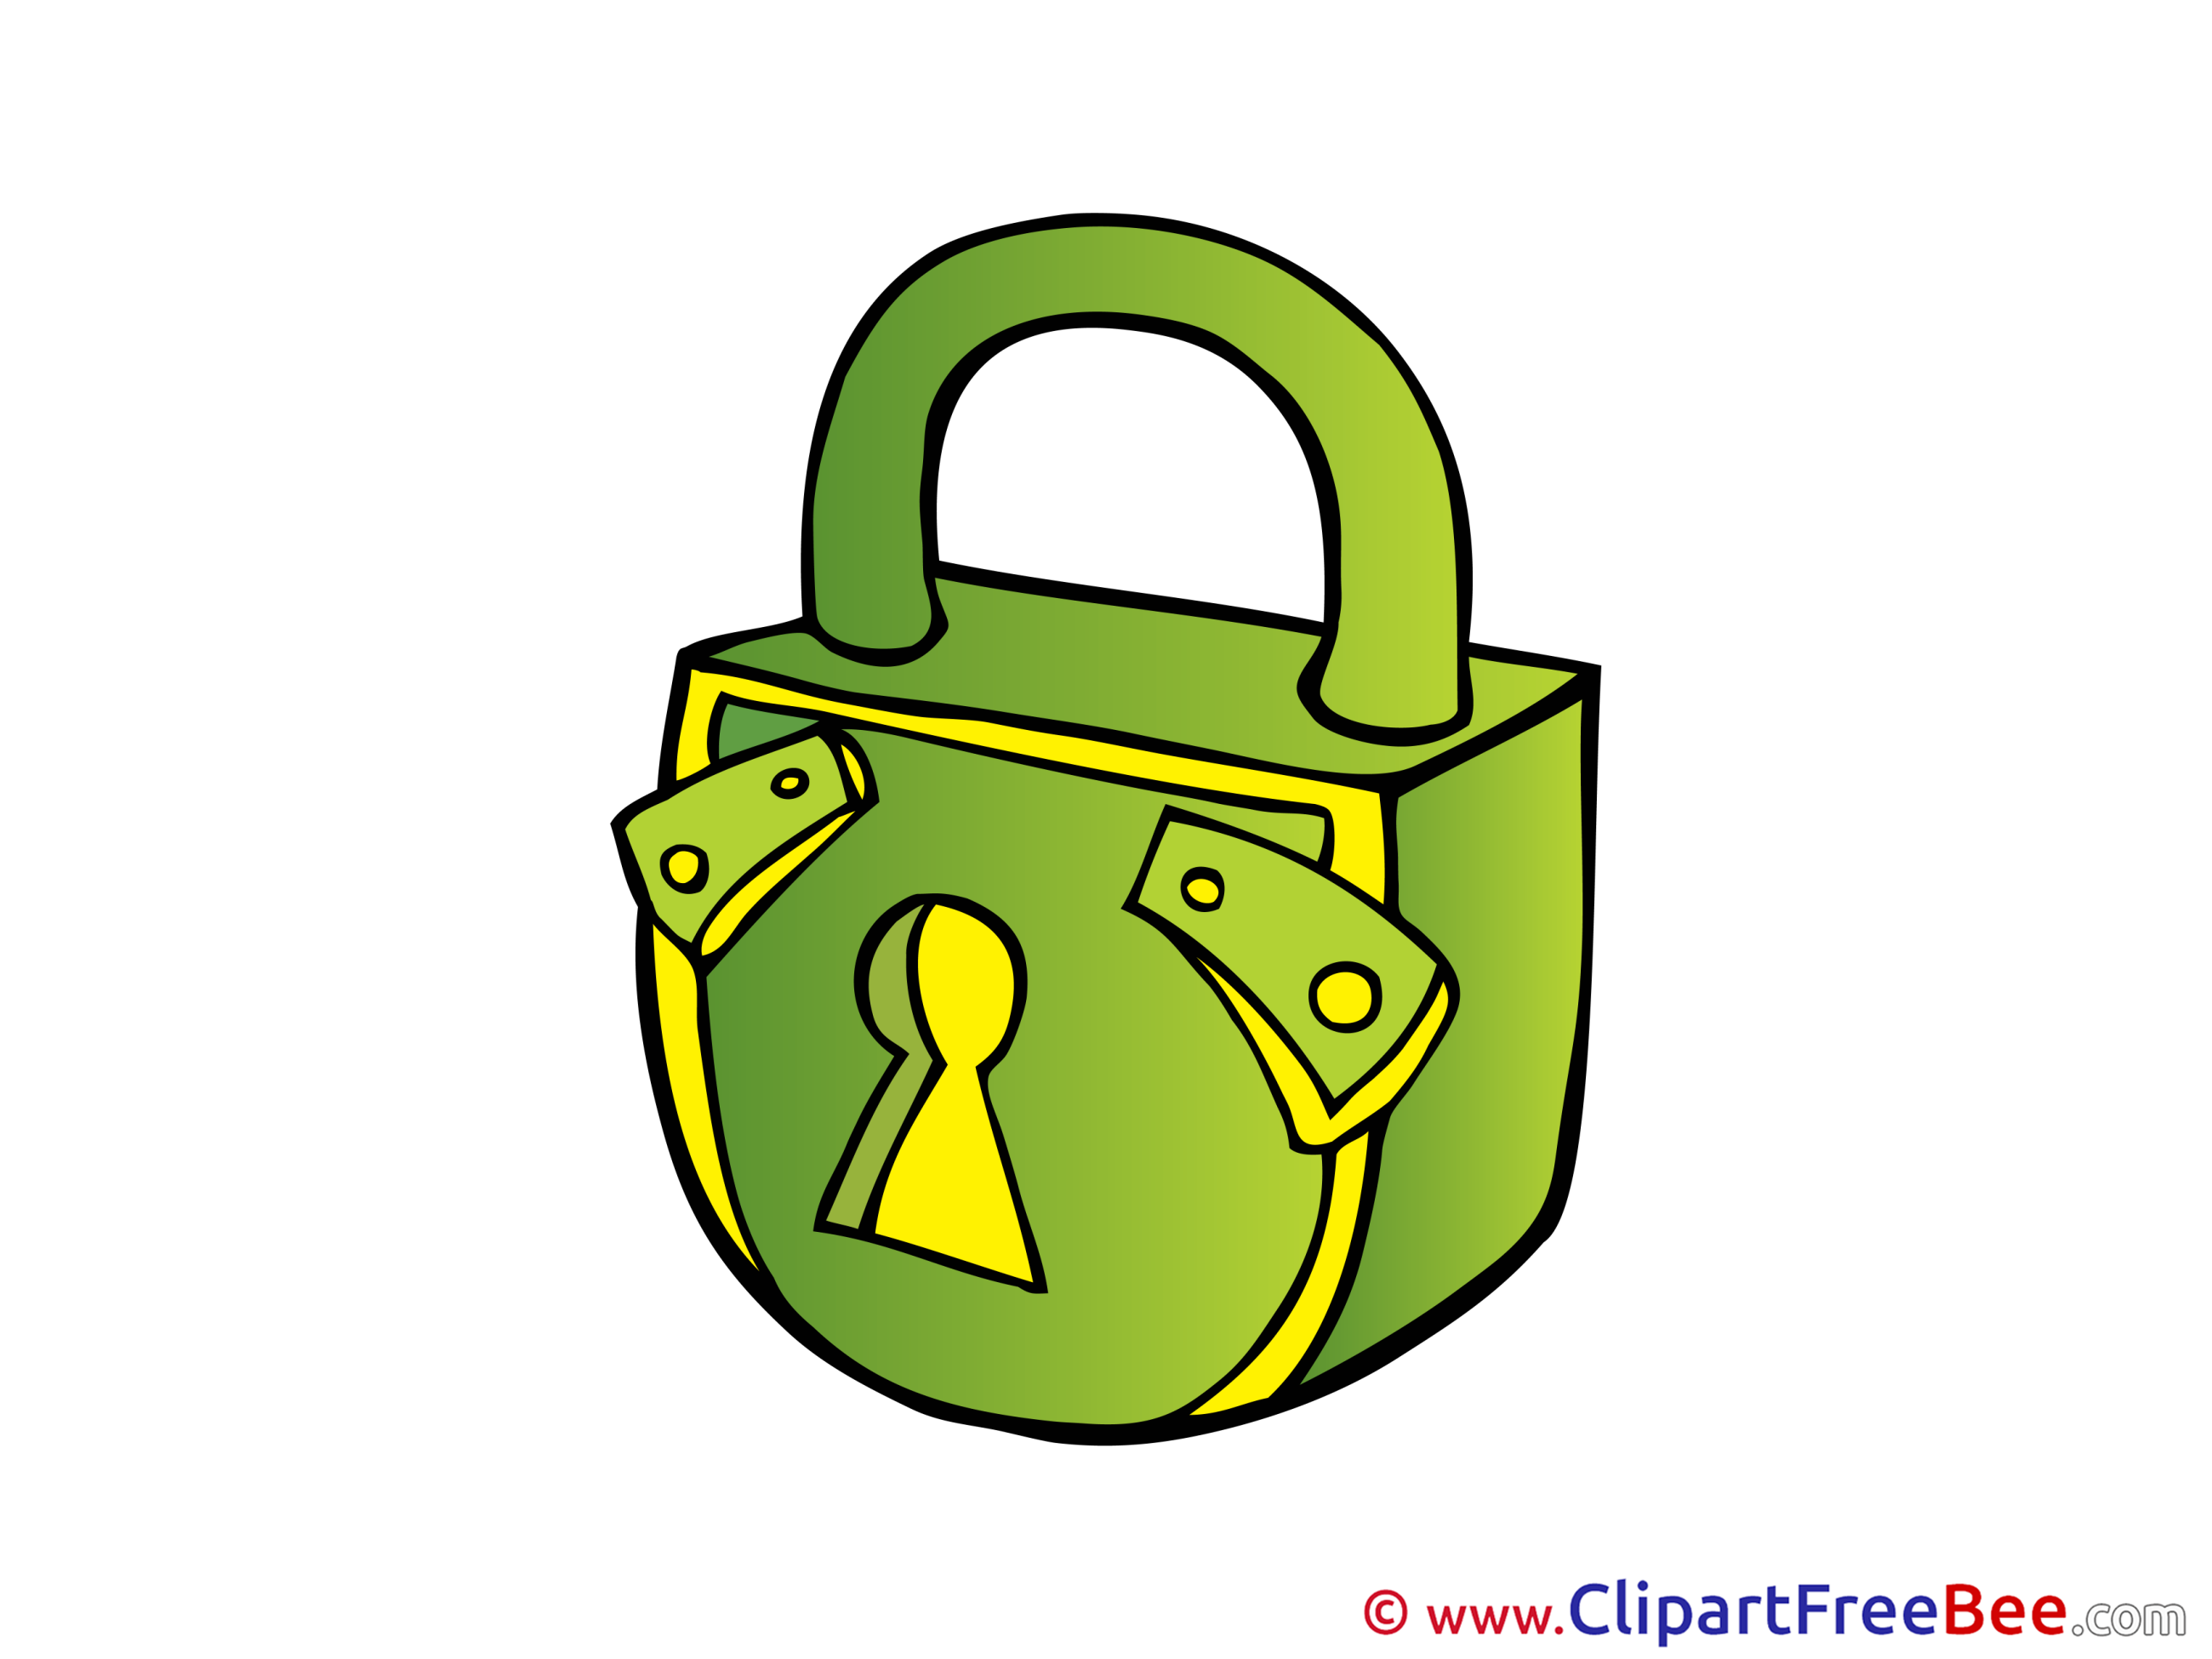 Padlock Images download free Cliparts